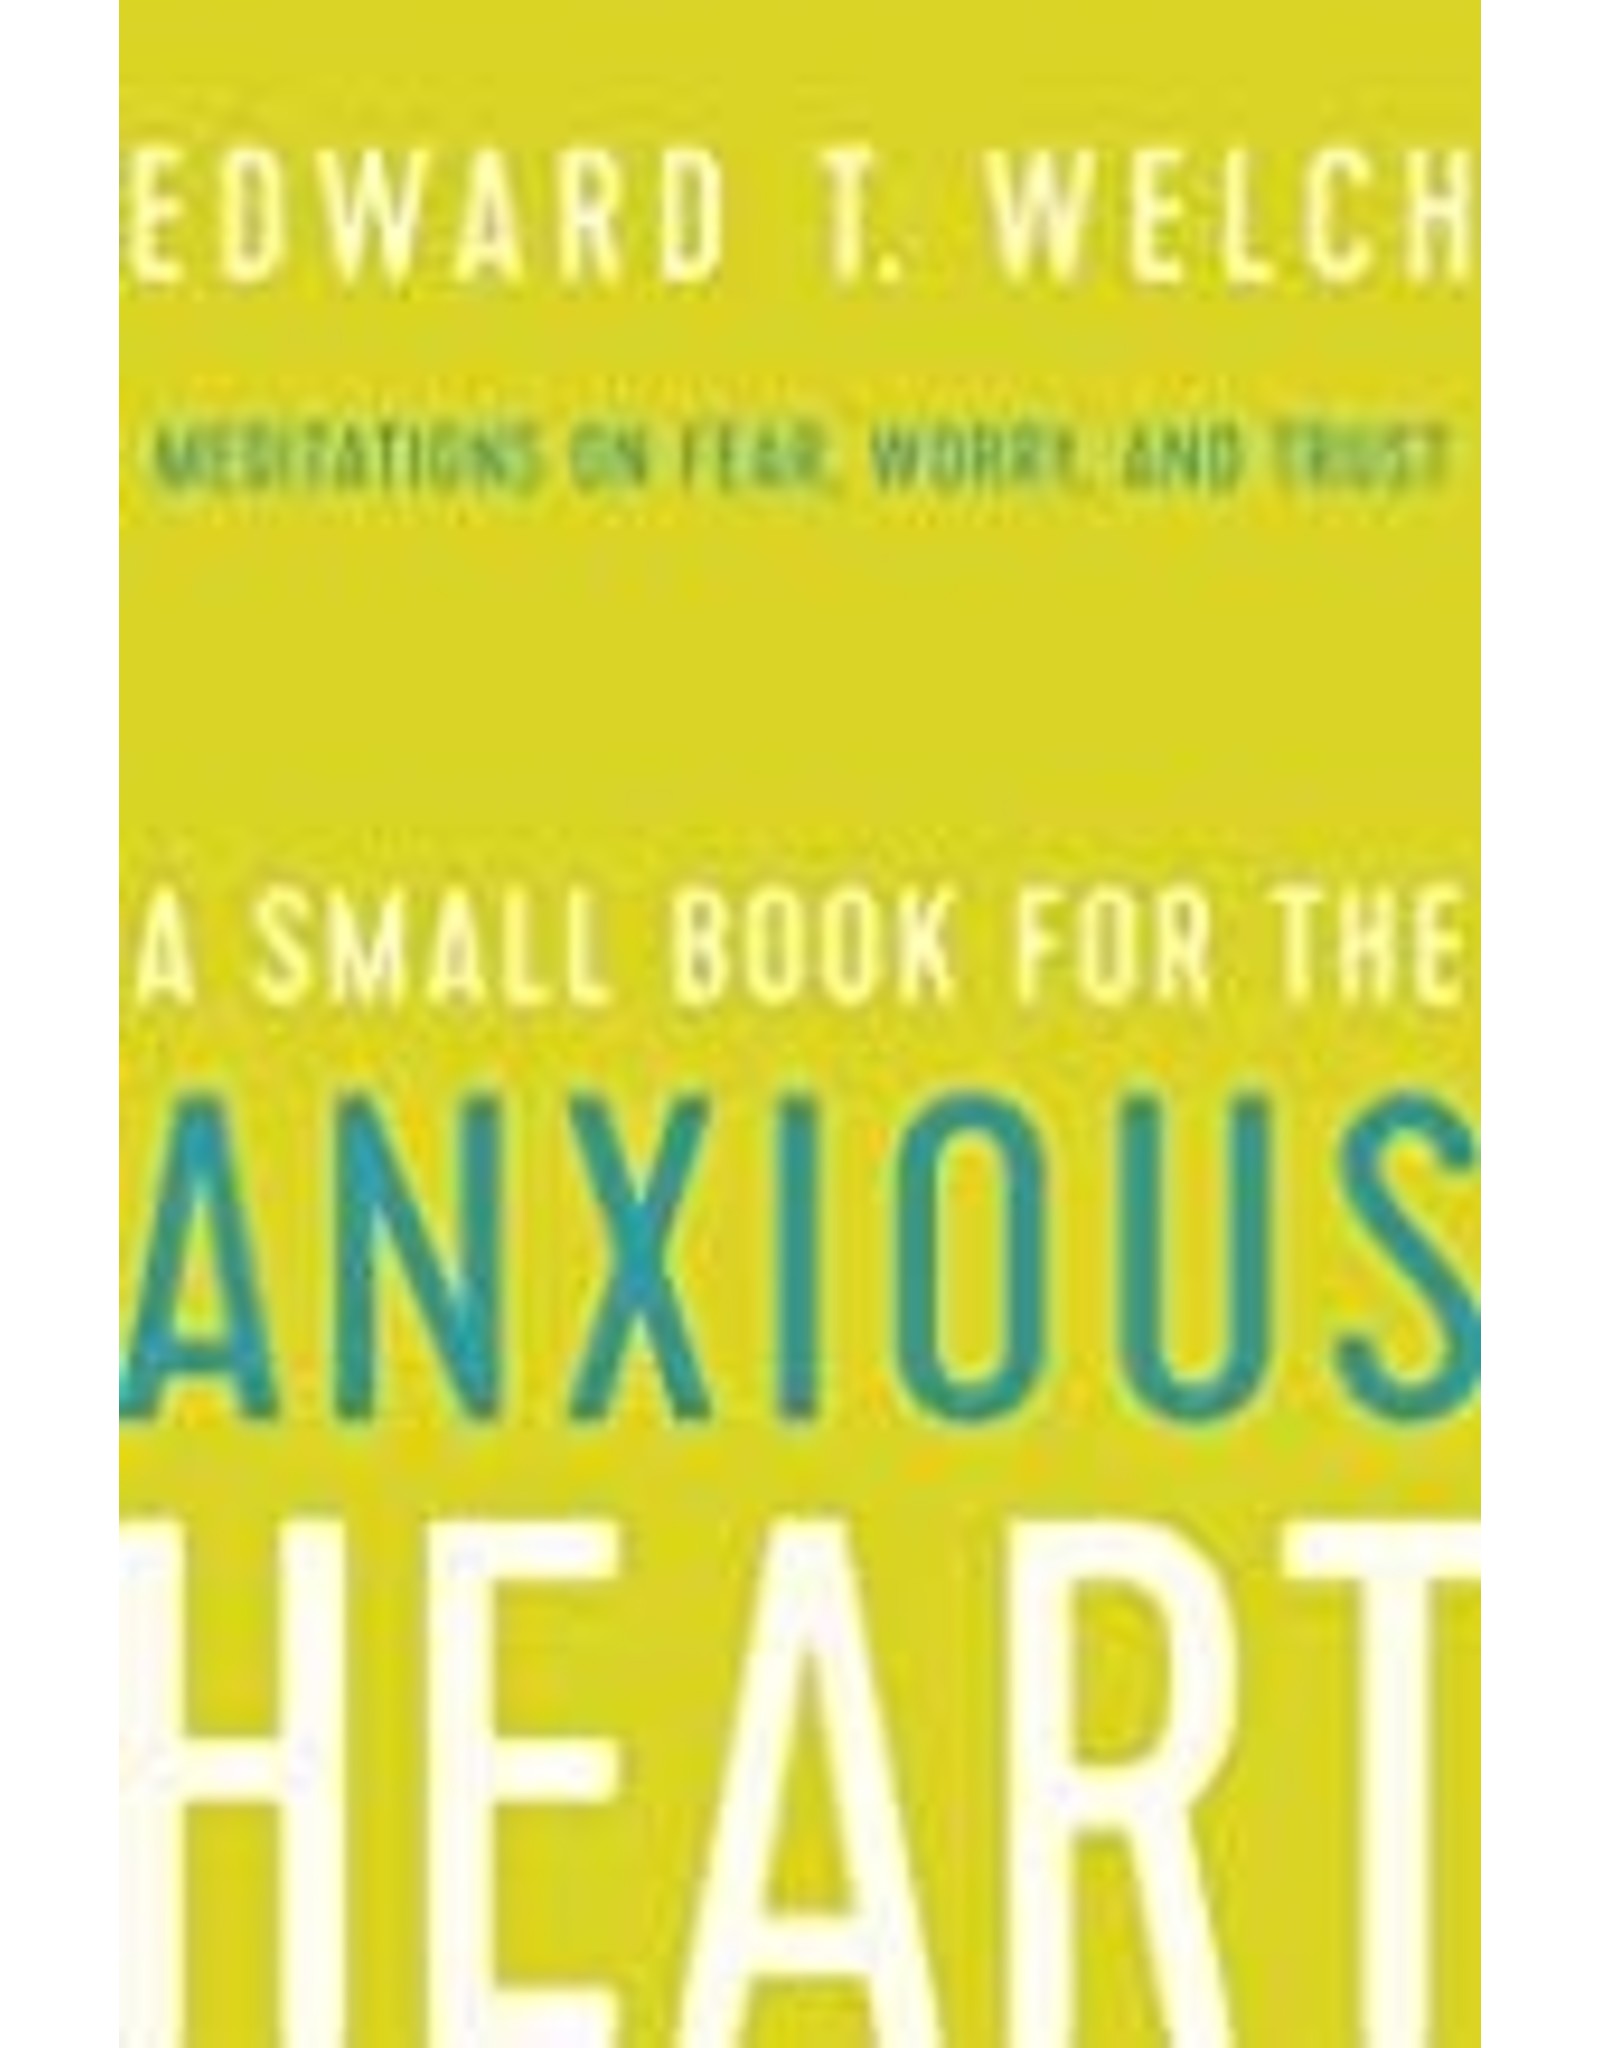 Edward T Welch A Small Book for the Anxious Heart